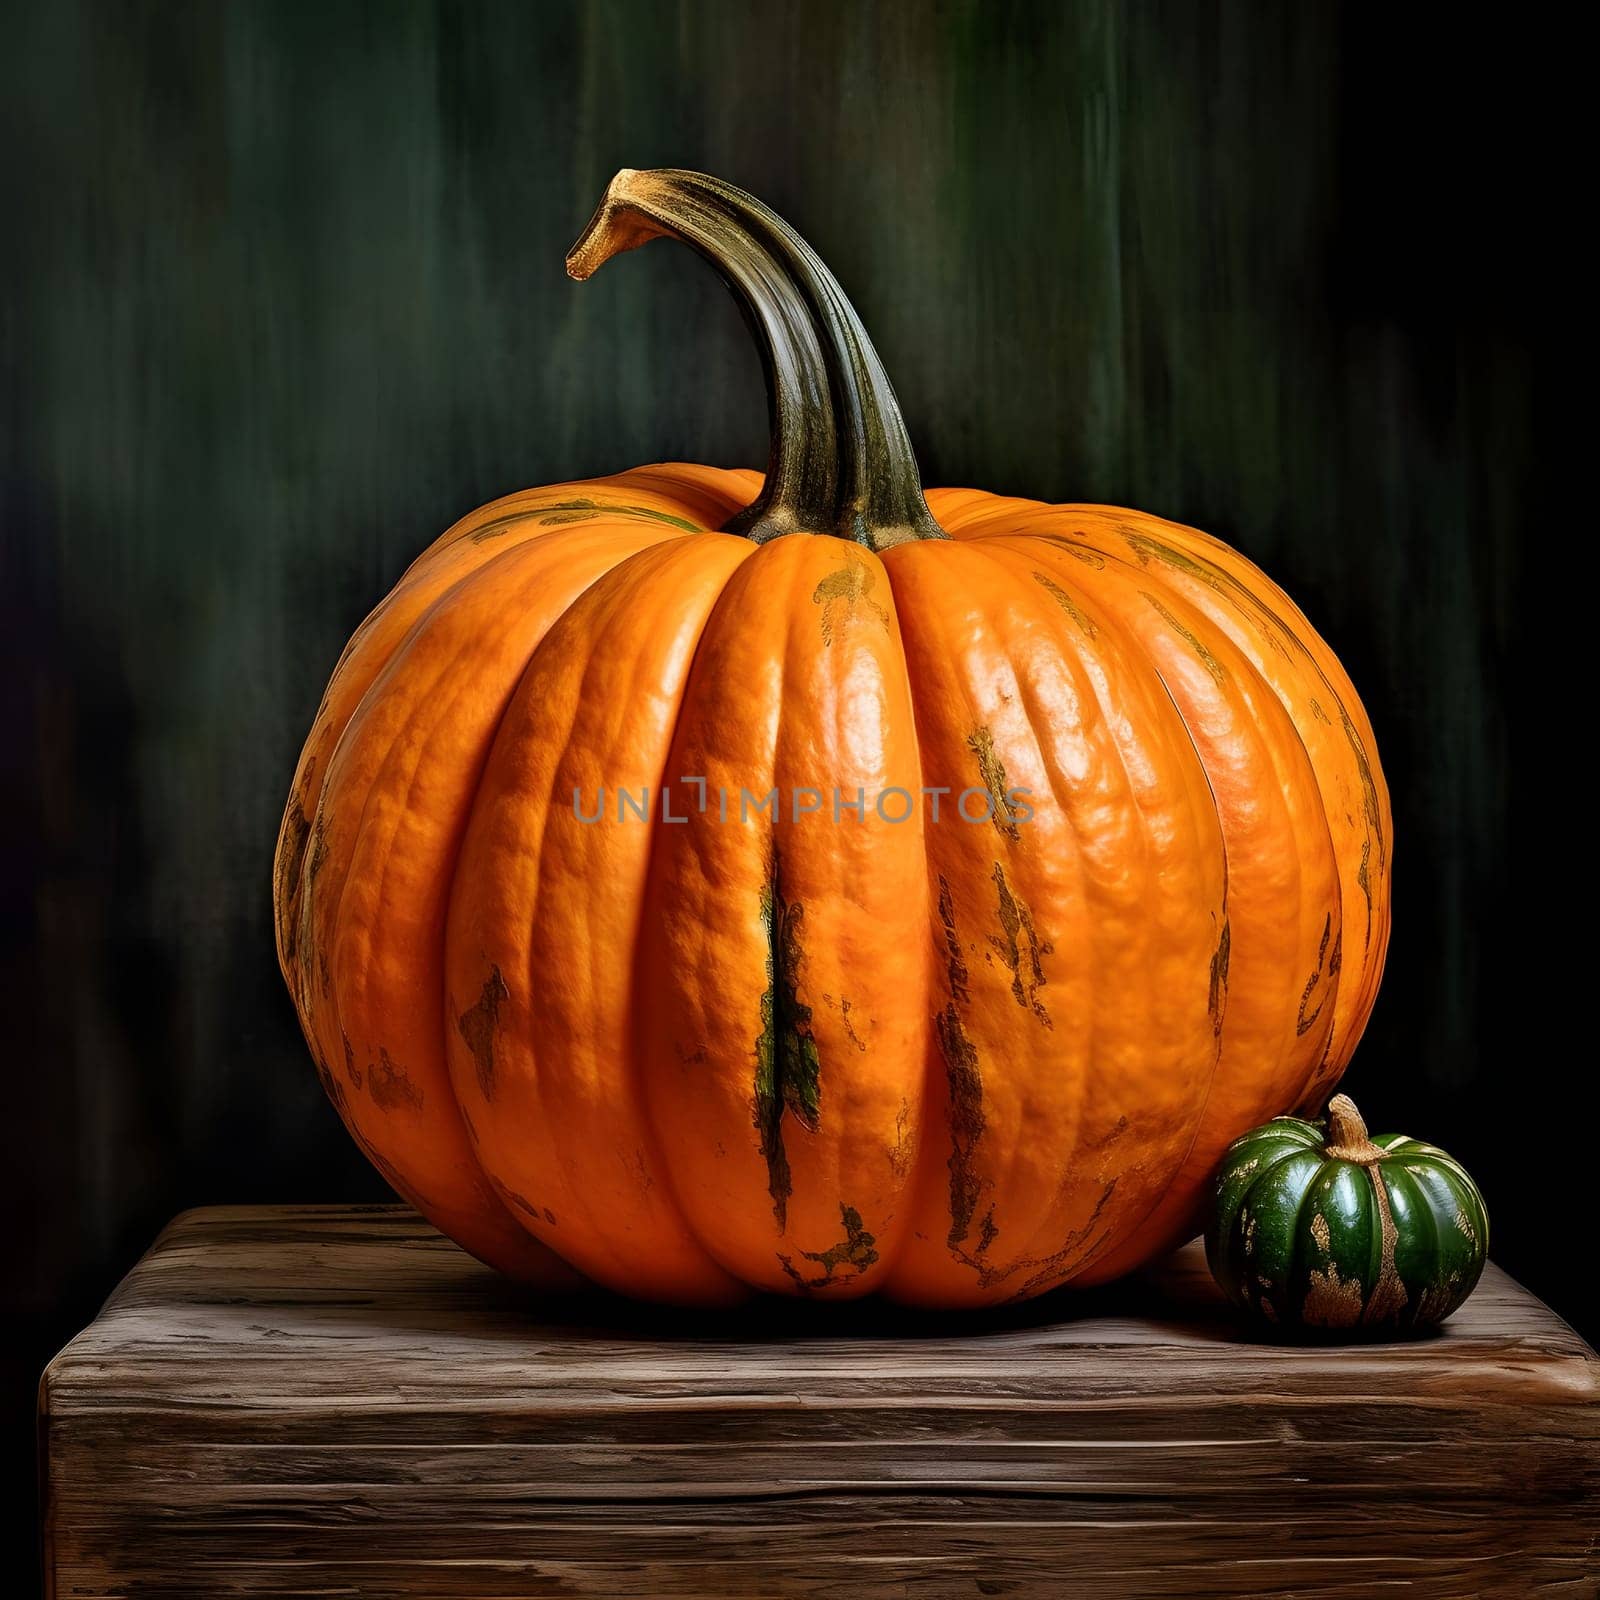 A giant orange pumpkin and a tiny dark green one on a wooden tabletop and wooden background. Pumpkin as a dish of thanksgiving for the harvest. An atmosphere of joy and celebration.